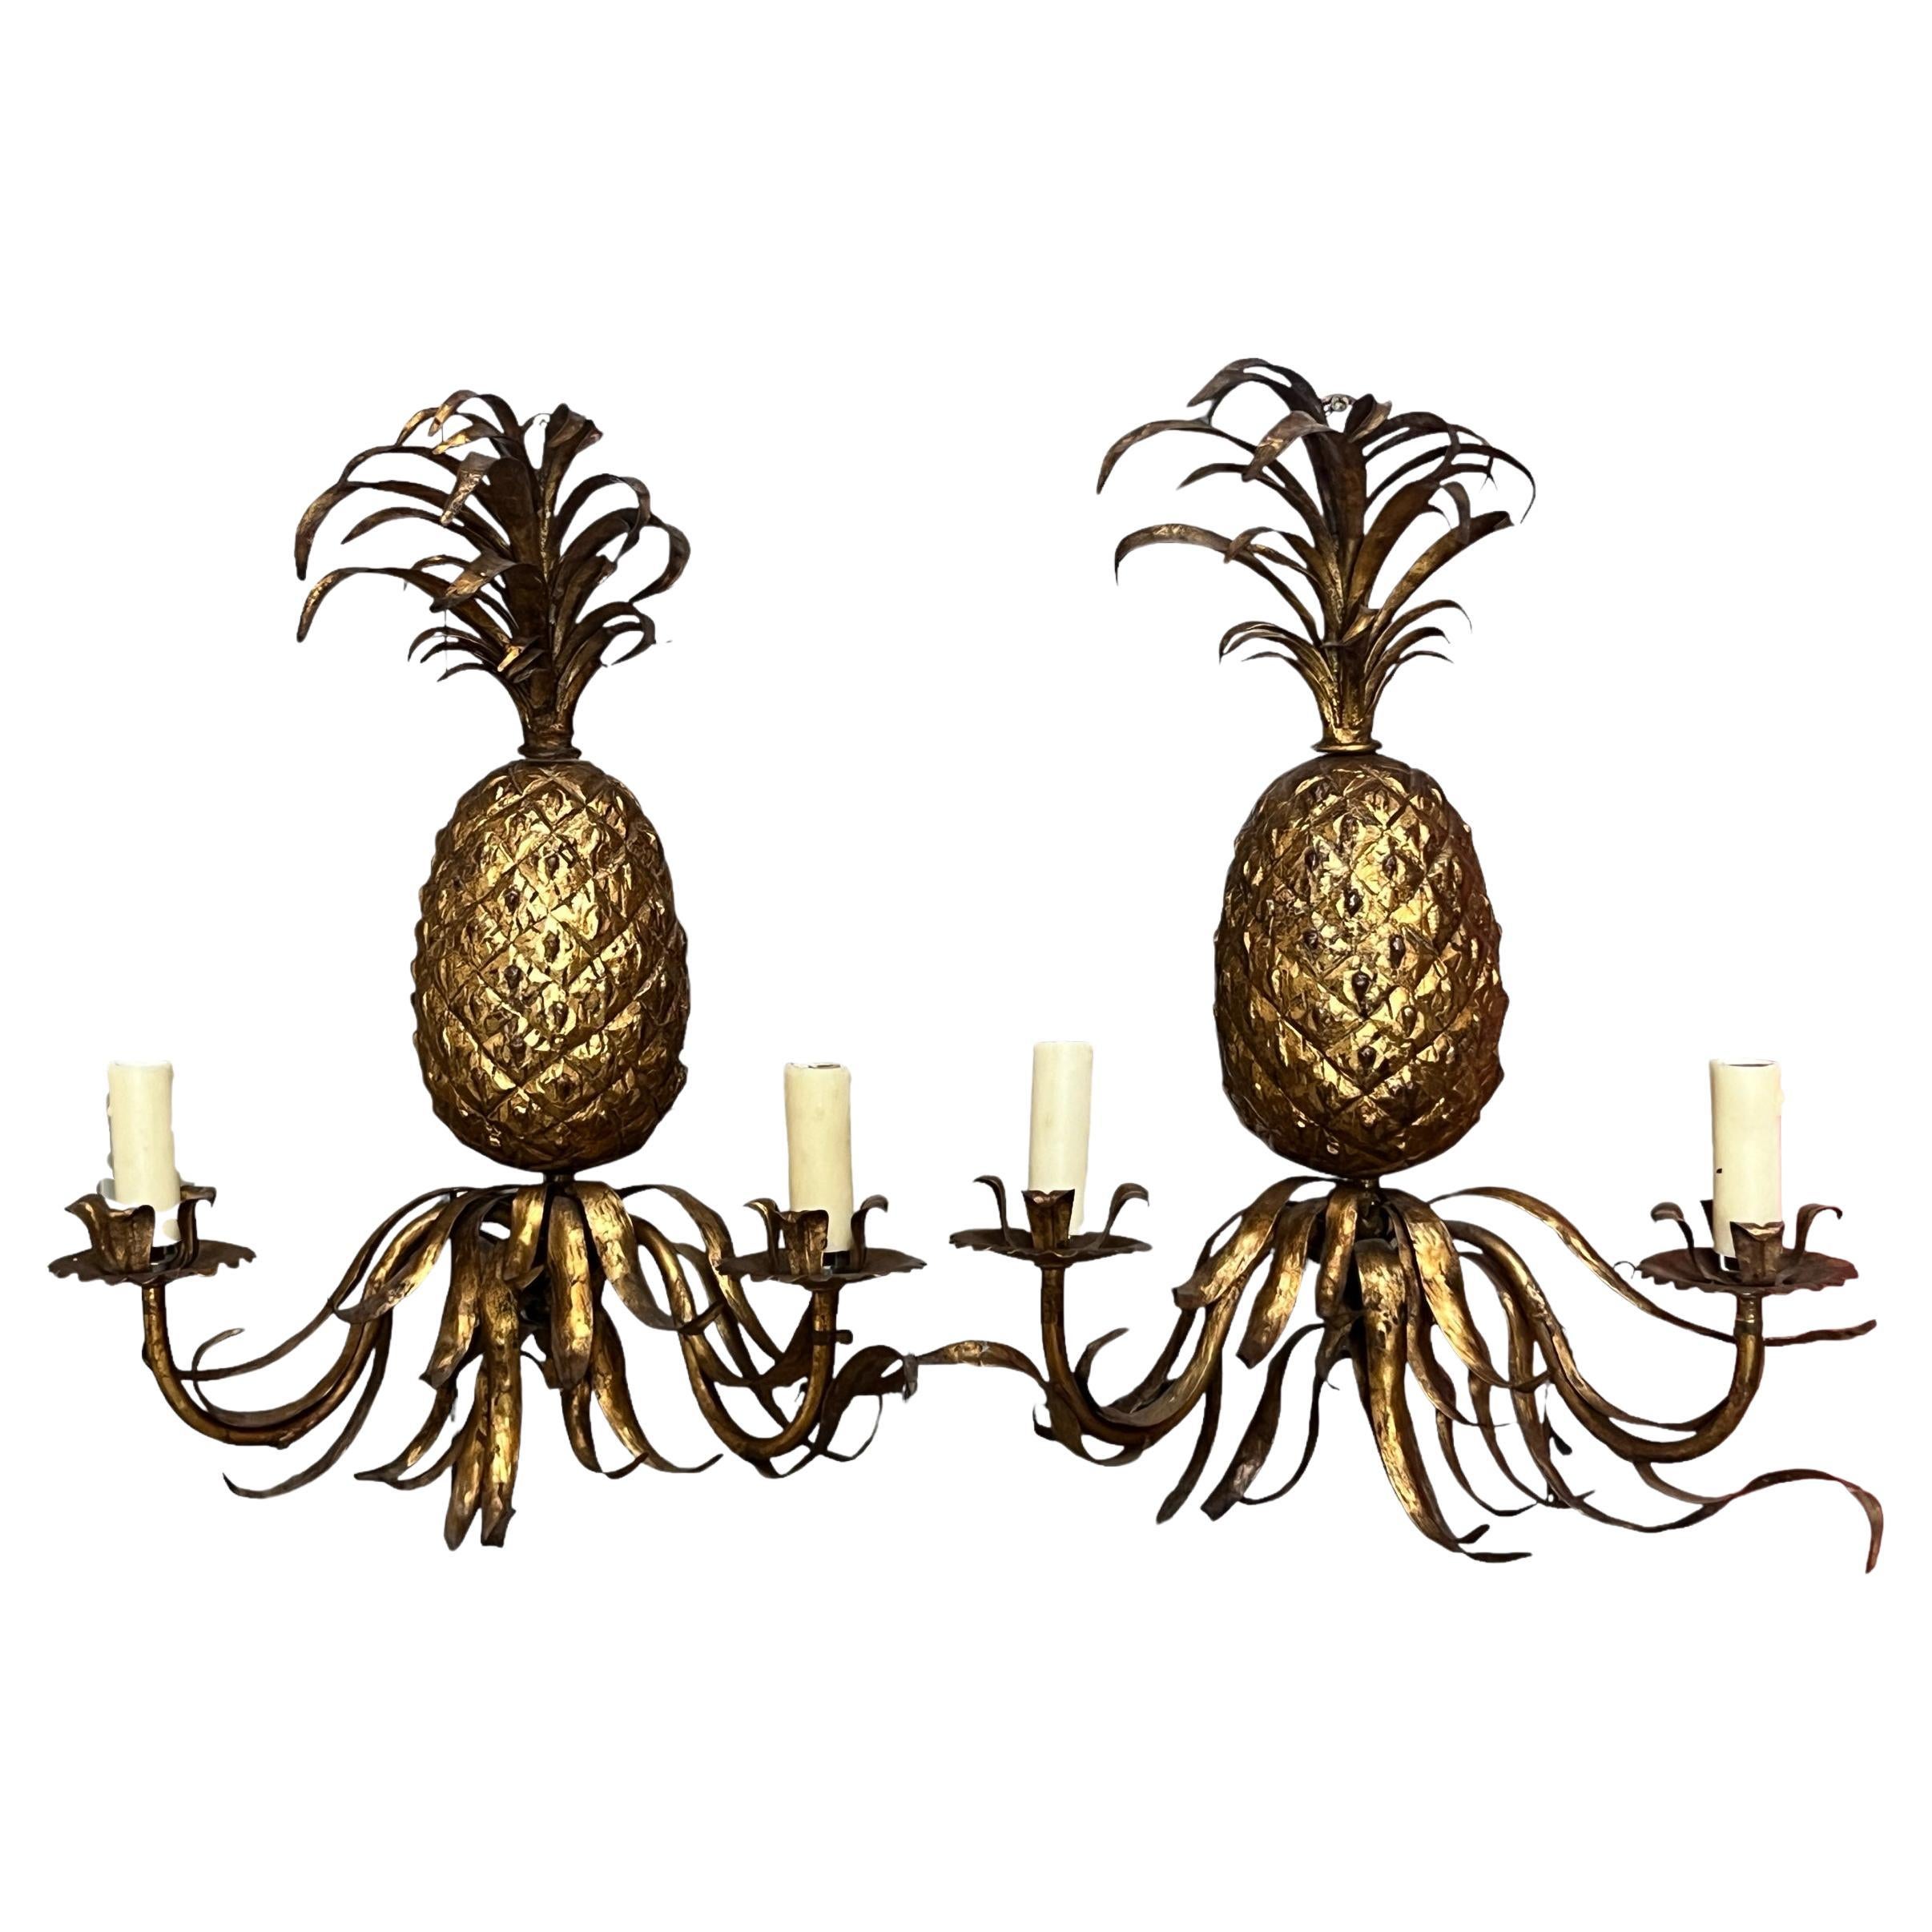 Pair of Mid 20th Century Gilt Iron Pineapple Wall Sconces For Sale